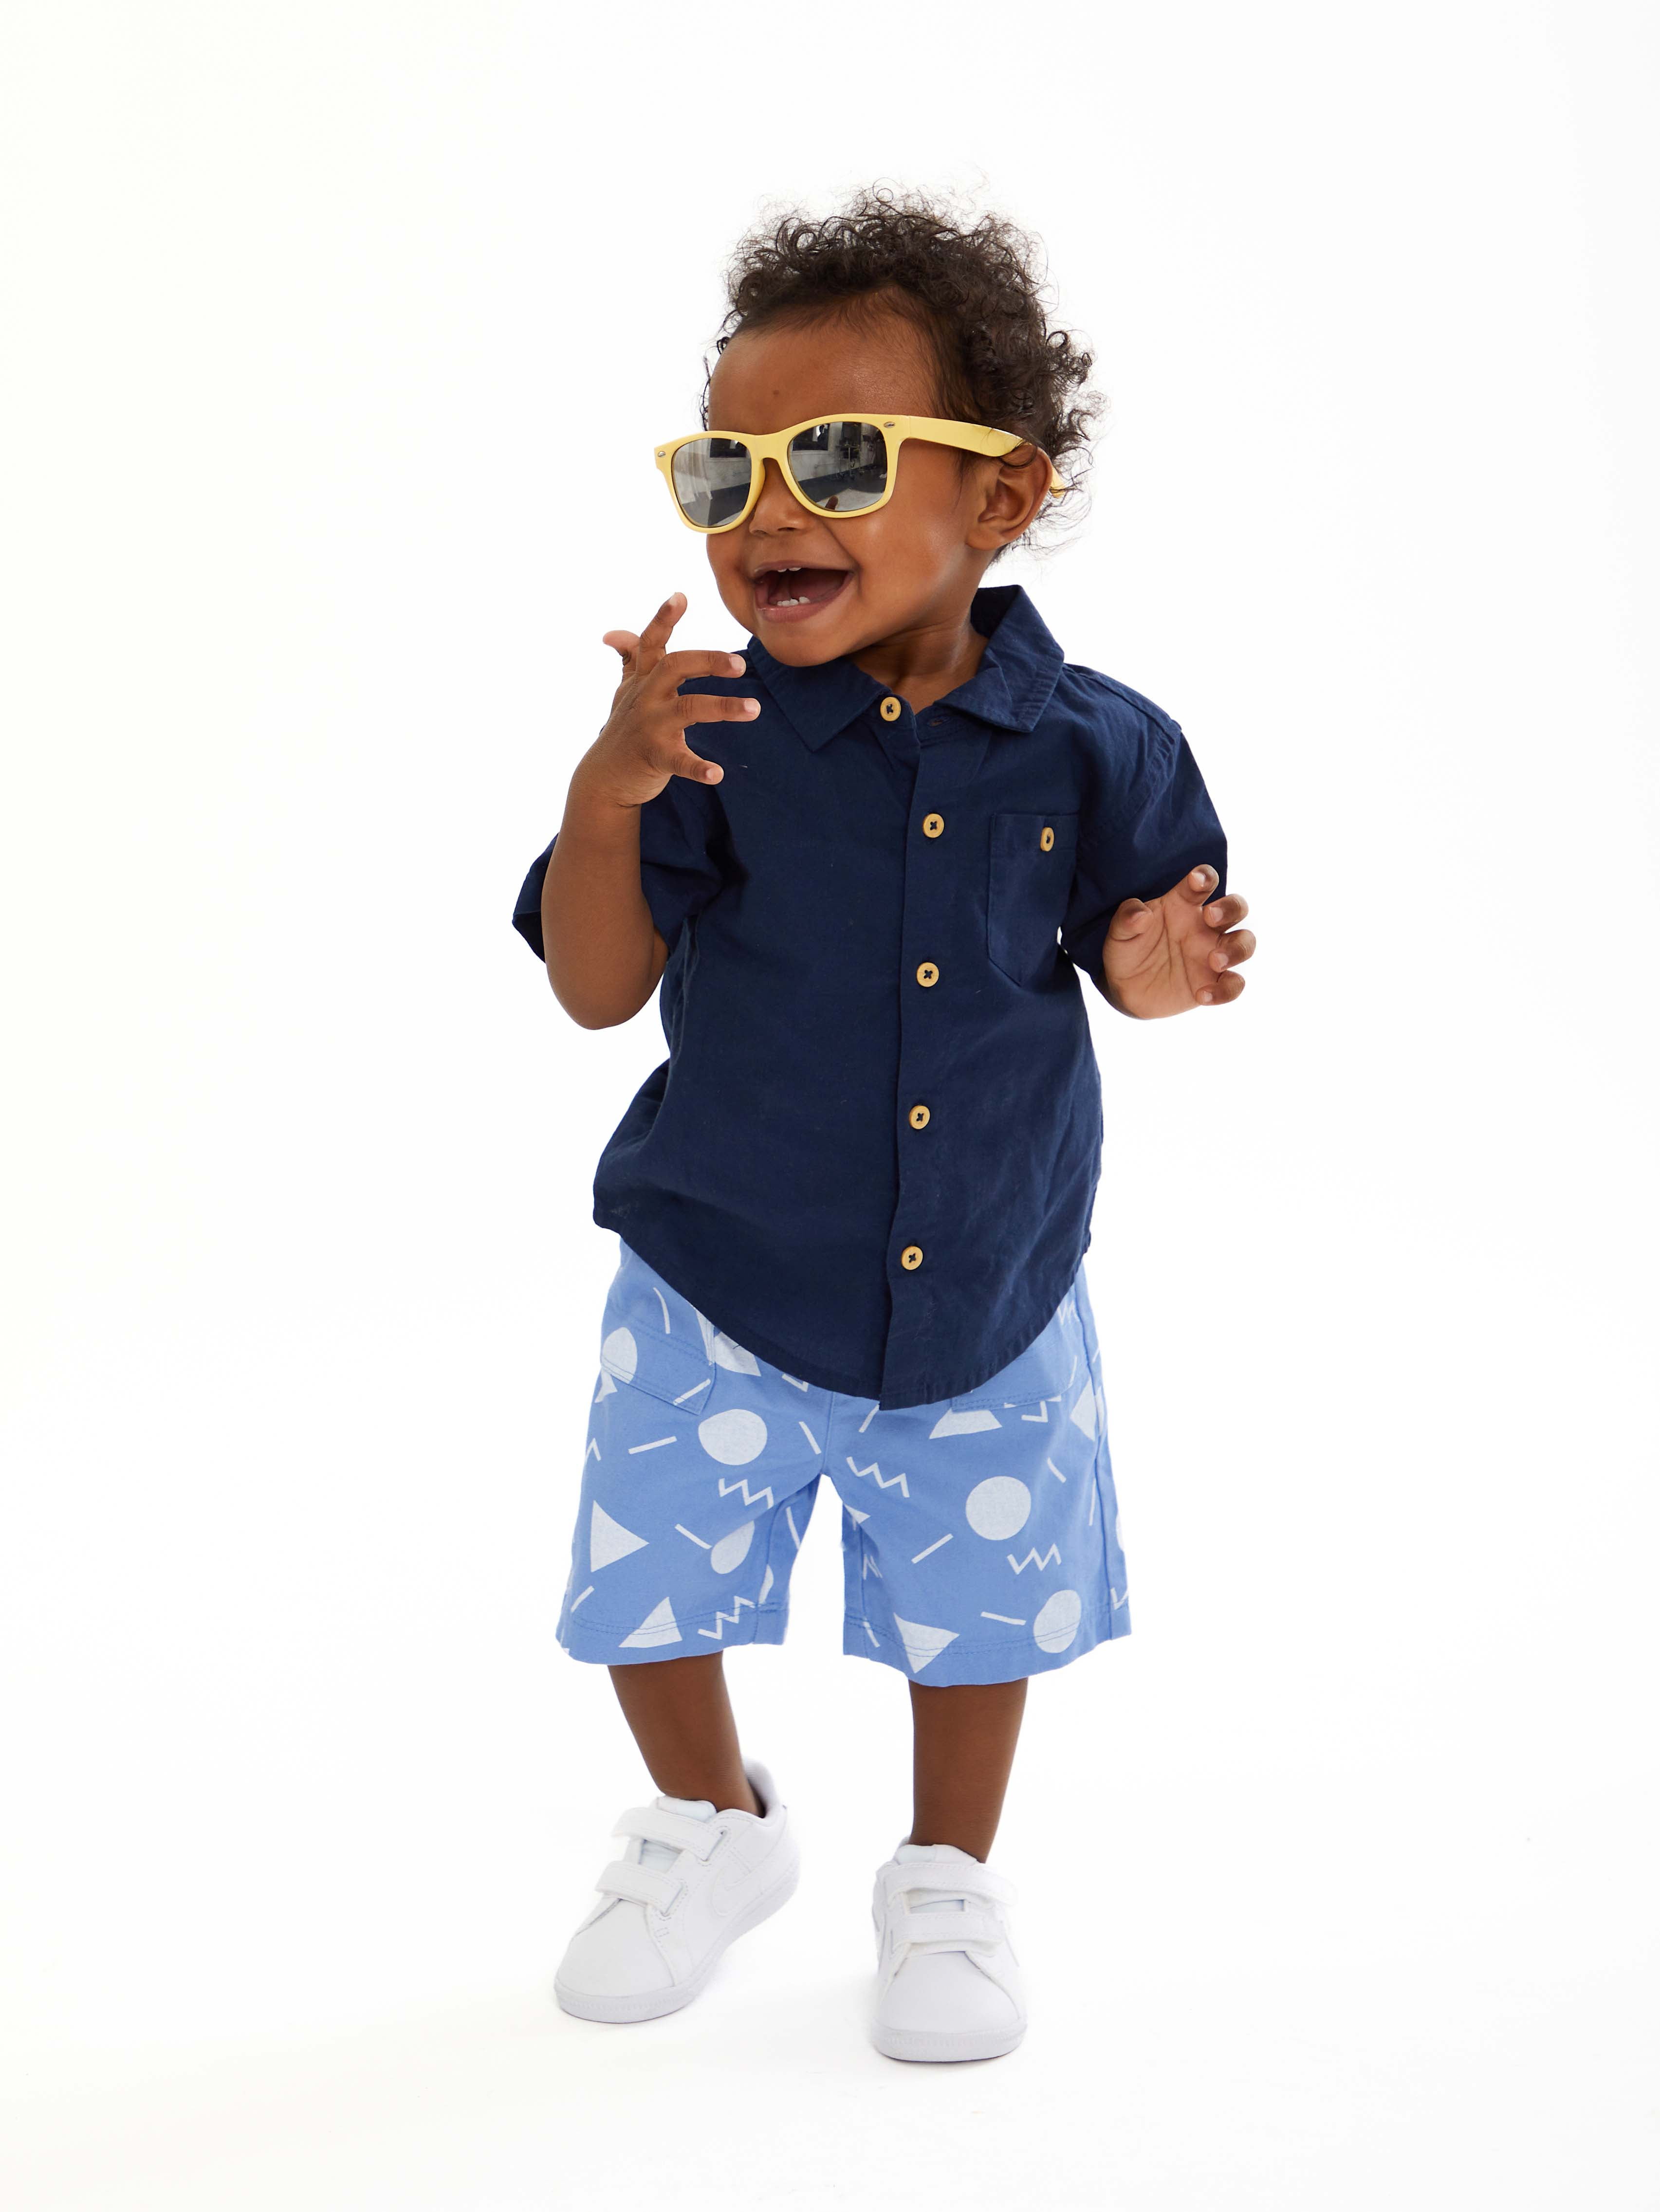  Toddler Baby Boys Checkerboard Plaid Print Short Sleeve Button  Down Shirts and Shorts Set Summer Outfits 0-24 Months (Brown, 0-6 Months):  Clothing, Shoes & Jewelry